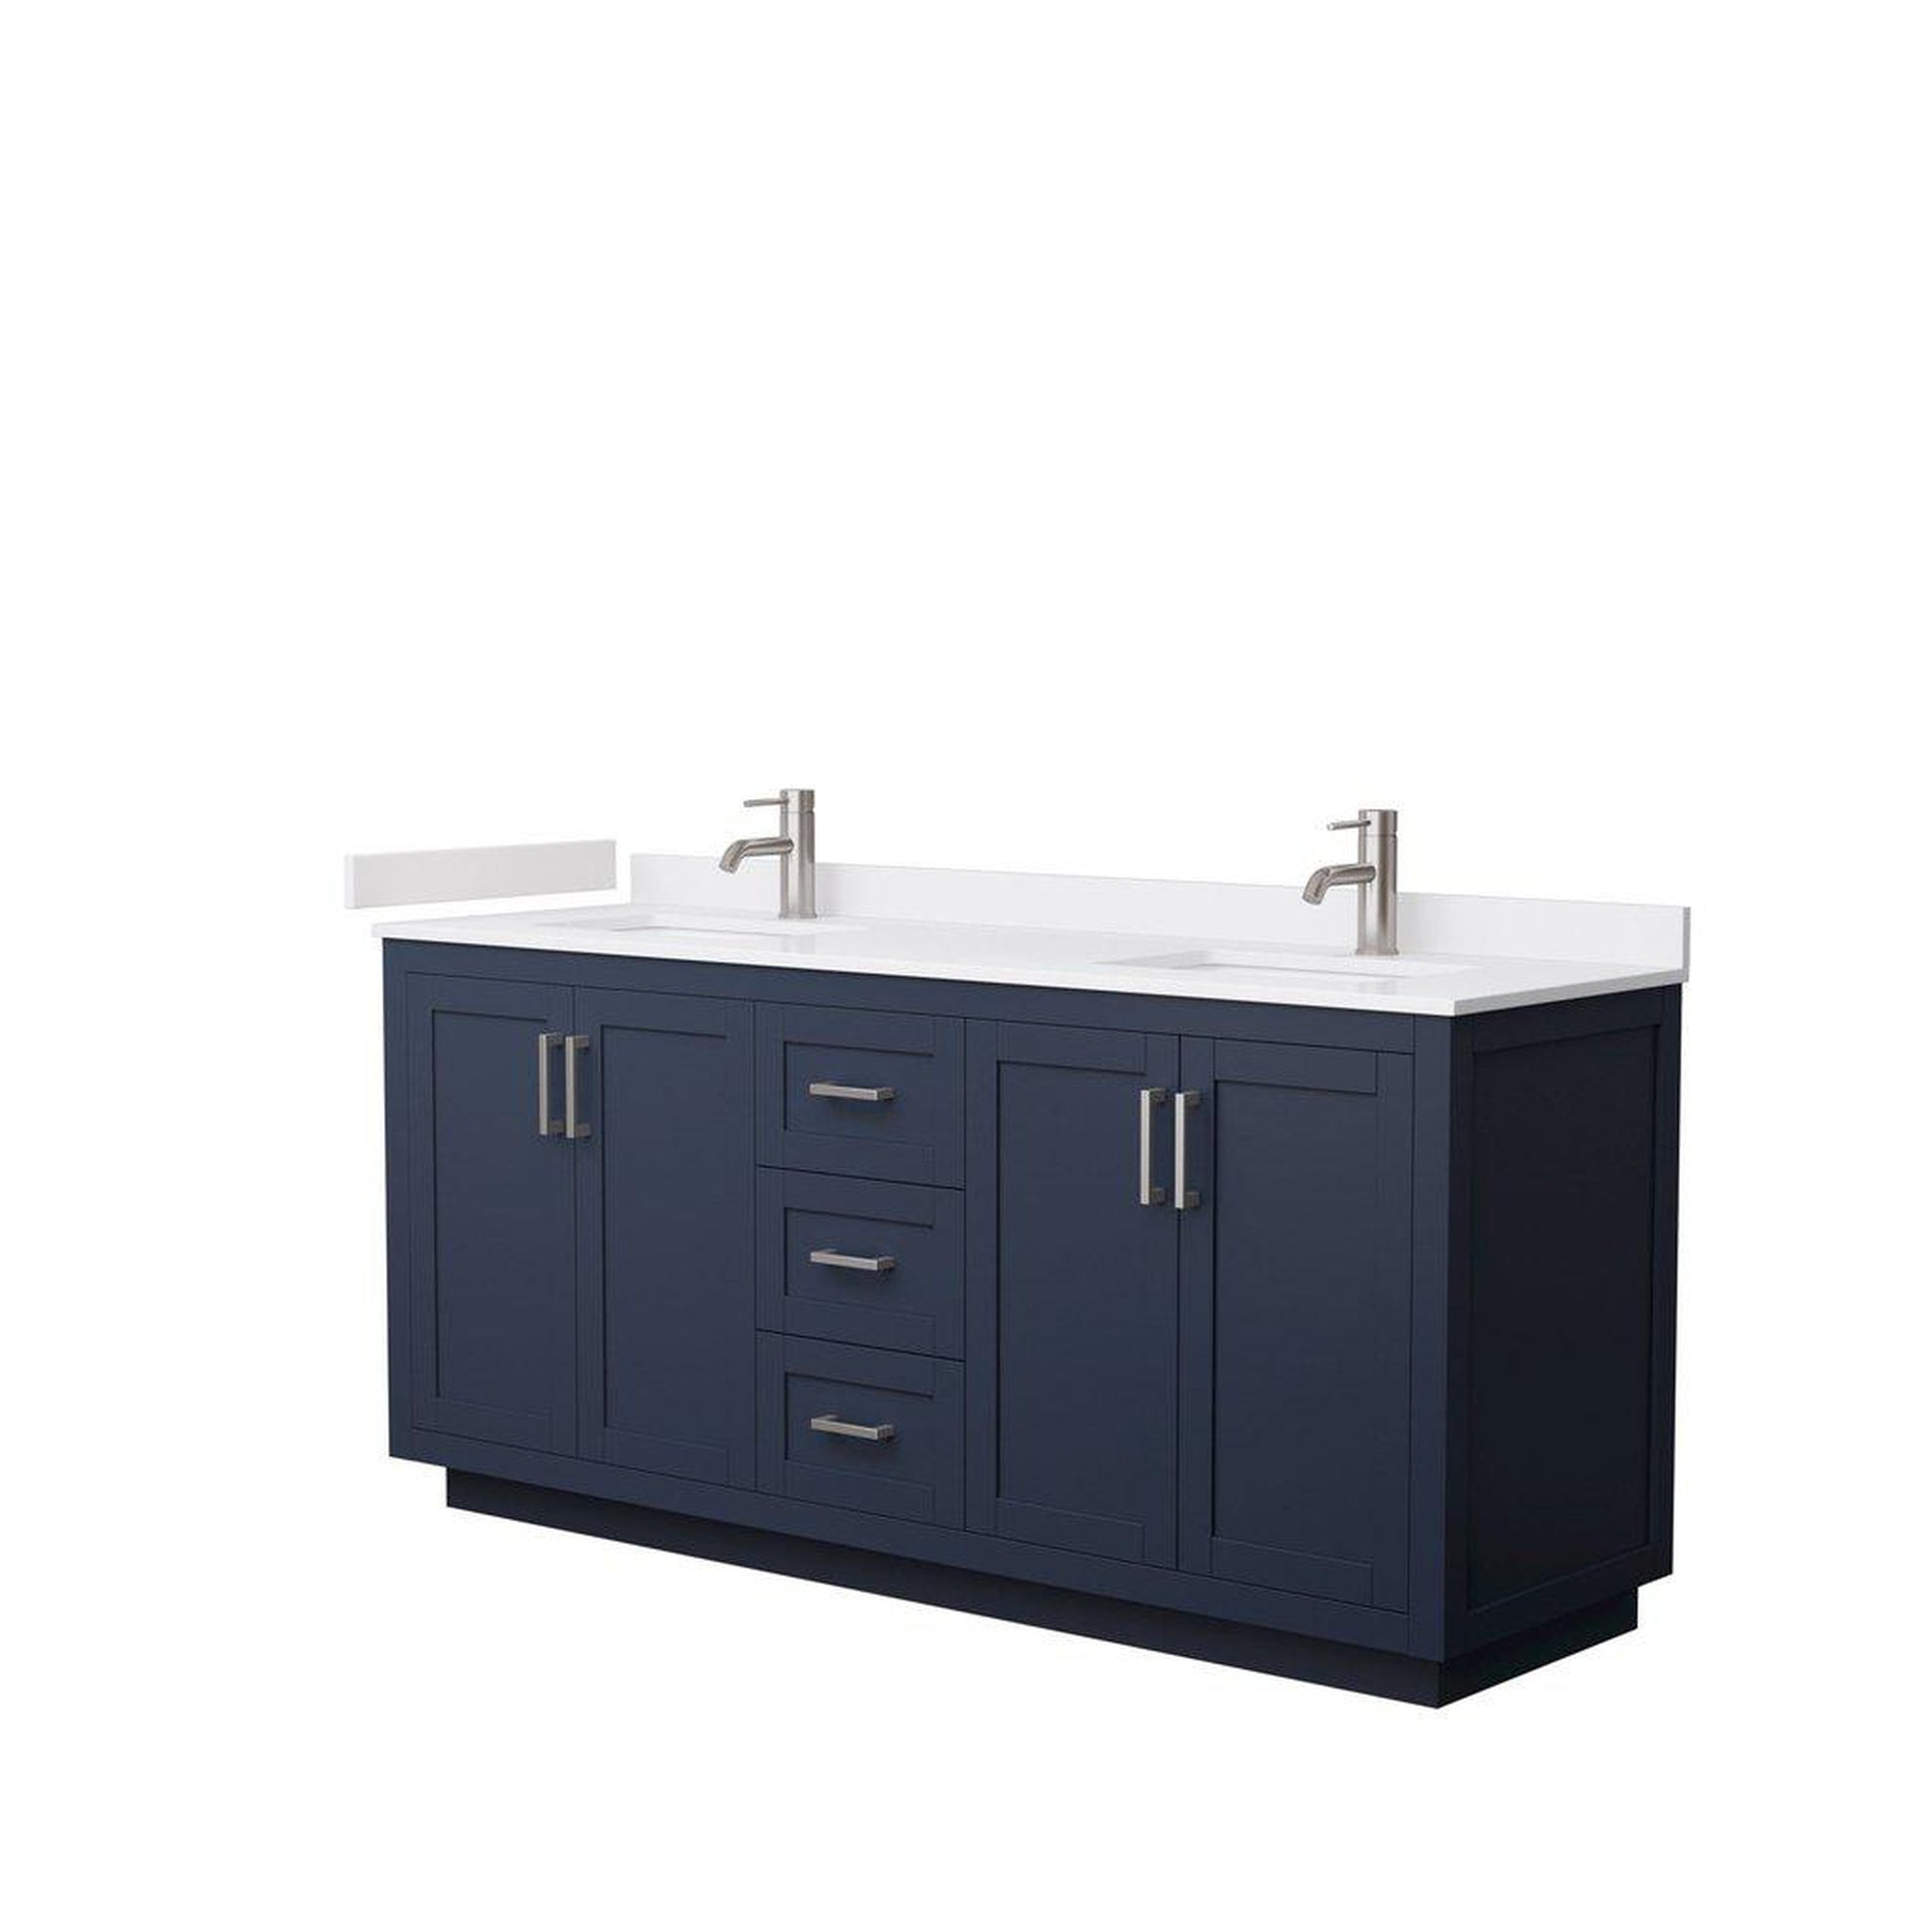 Wyndham Collection Miranda 72" Double Bathroom Dark Blue Vanity Set With White Cultured Marble Countertop, Undermount Square Sink, And Brushed Nickel Trim